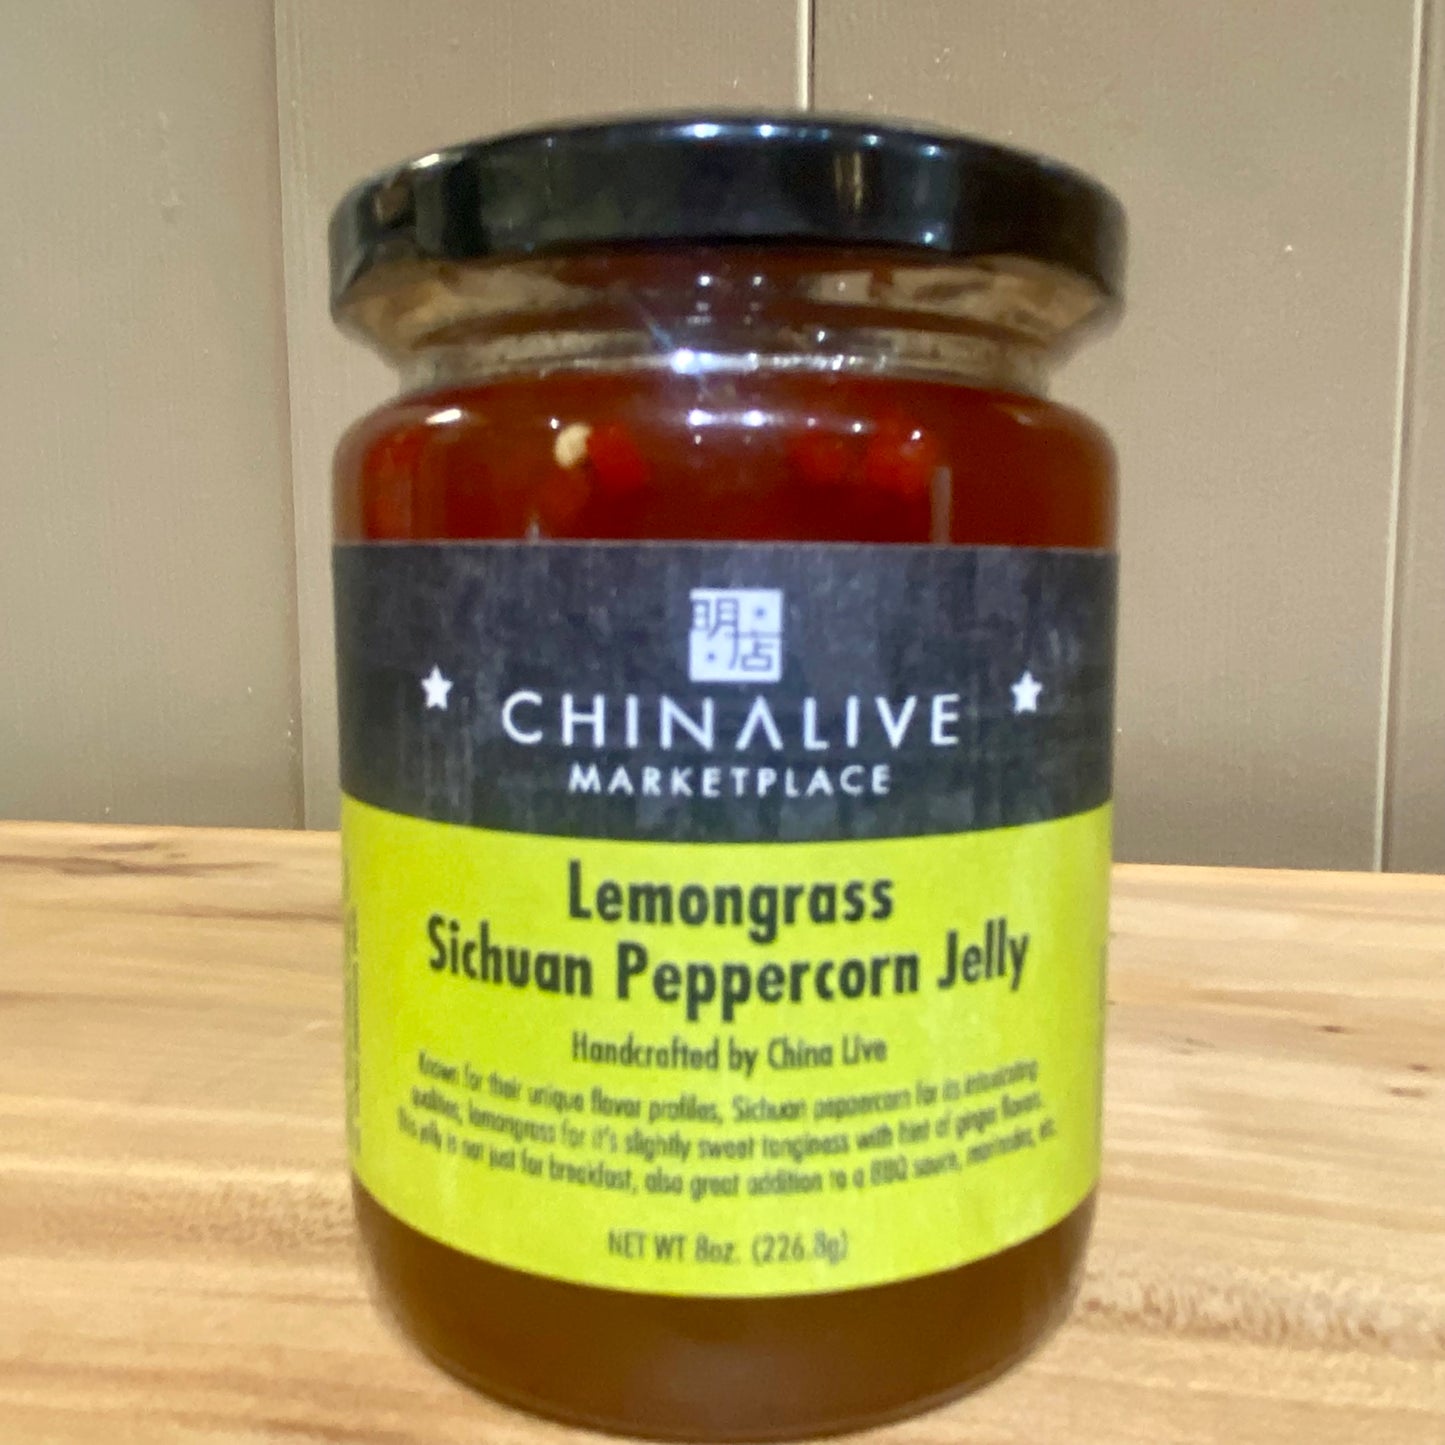 China Live Handcrafted Jams & Jelly